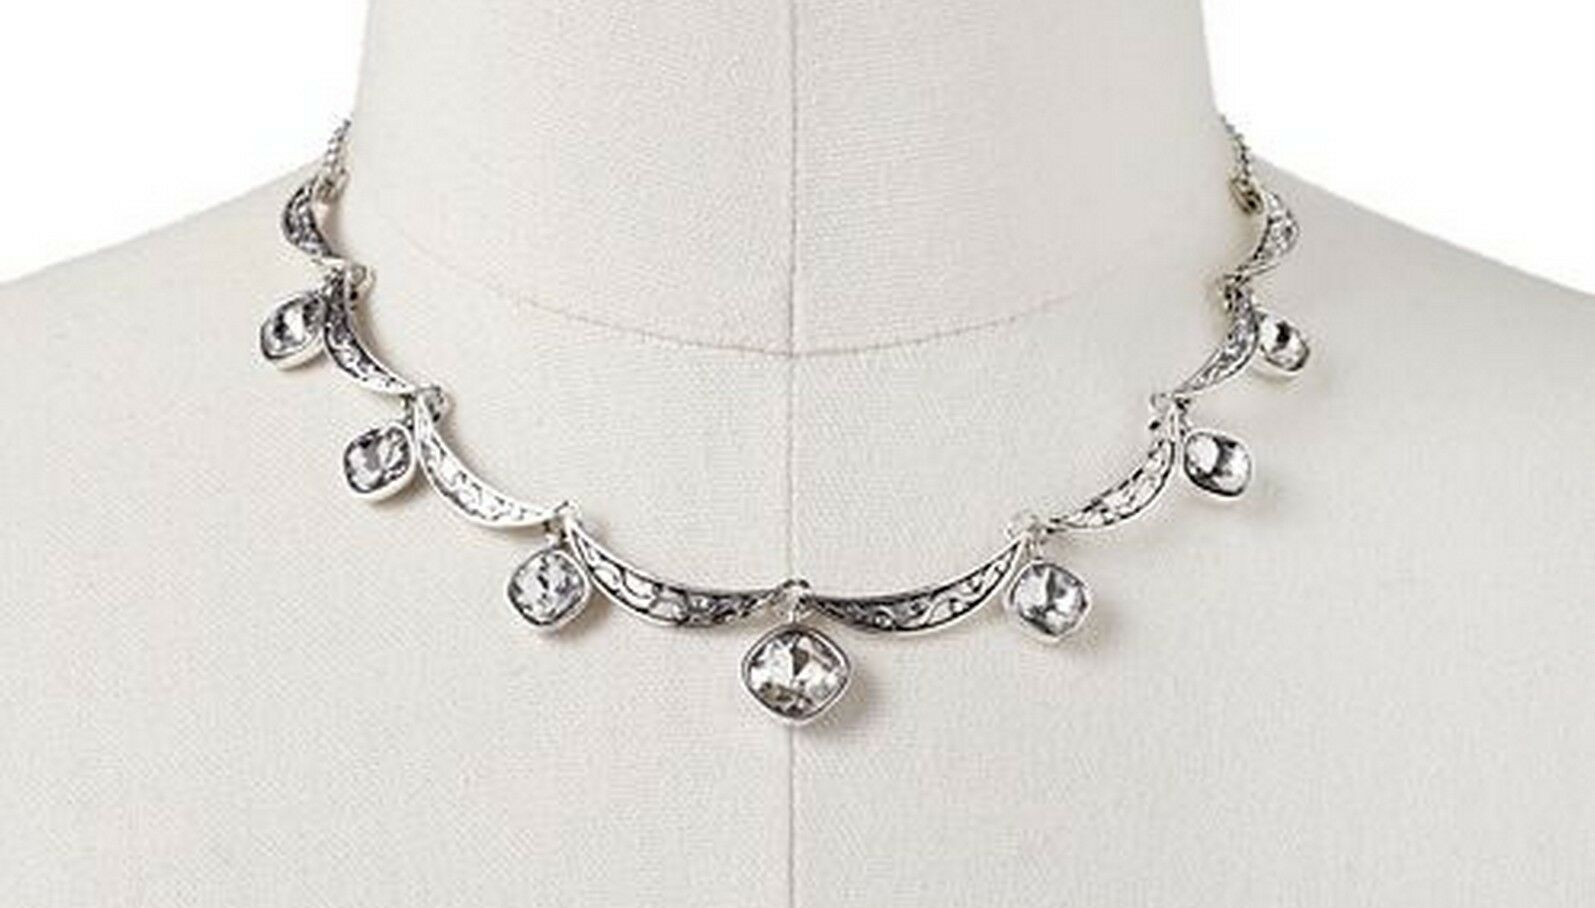 Primary image for Trifari Silver Tone Dainty Simulated Crystal Collar Necklace